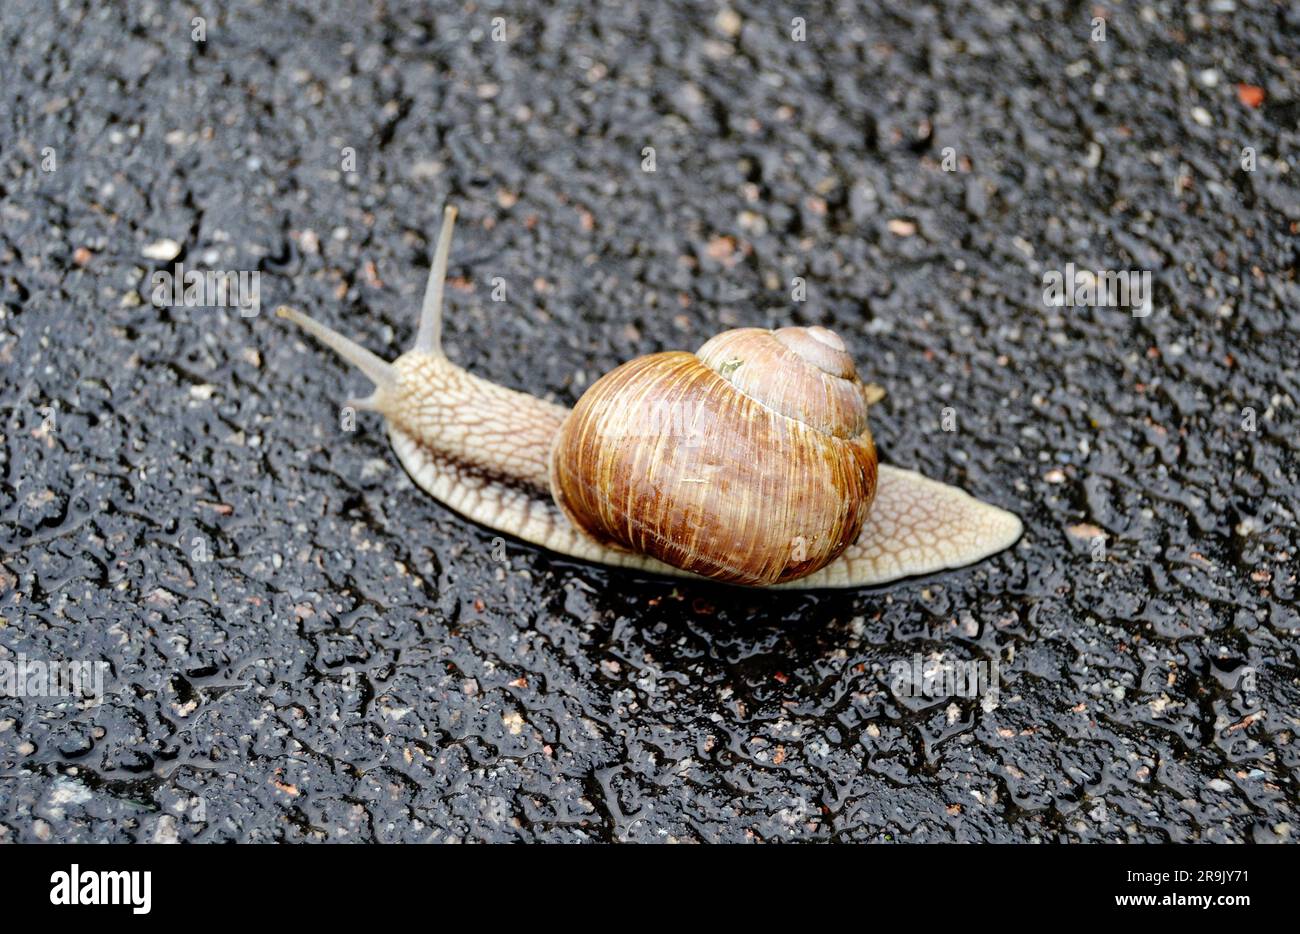 Big garden snail in shell crawling on wet road hurry home, snail Helix consist of edible tasty food coiled shell to protect body, natural animal snail Stock Photo